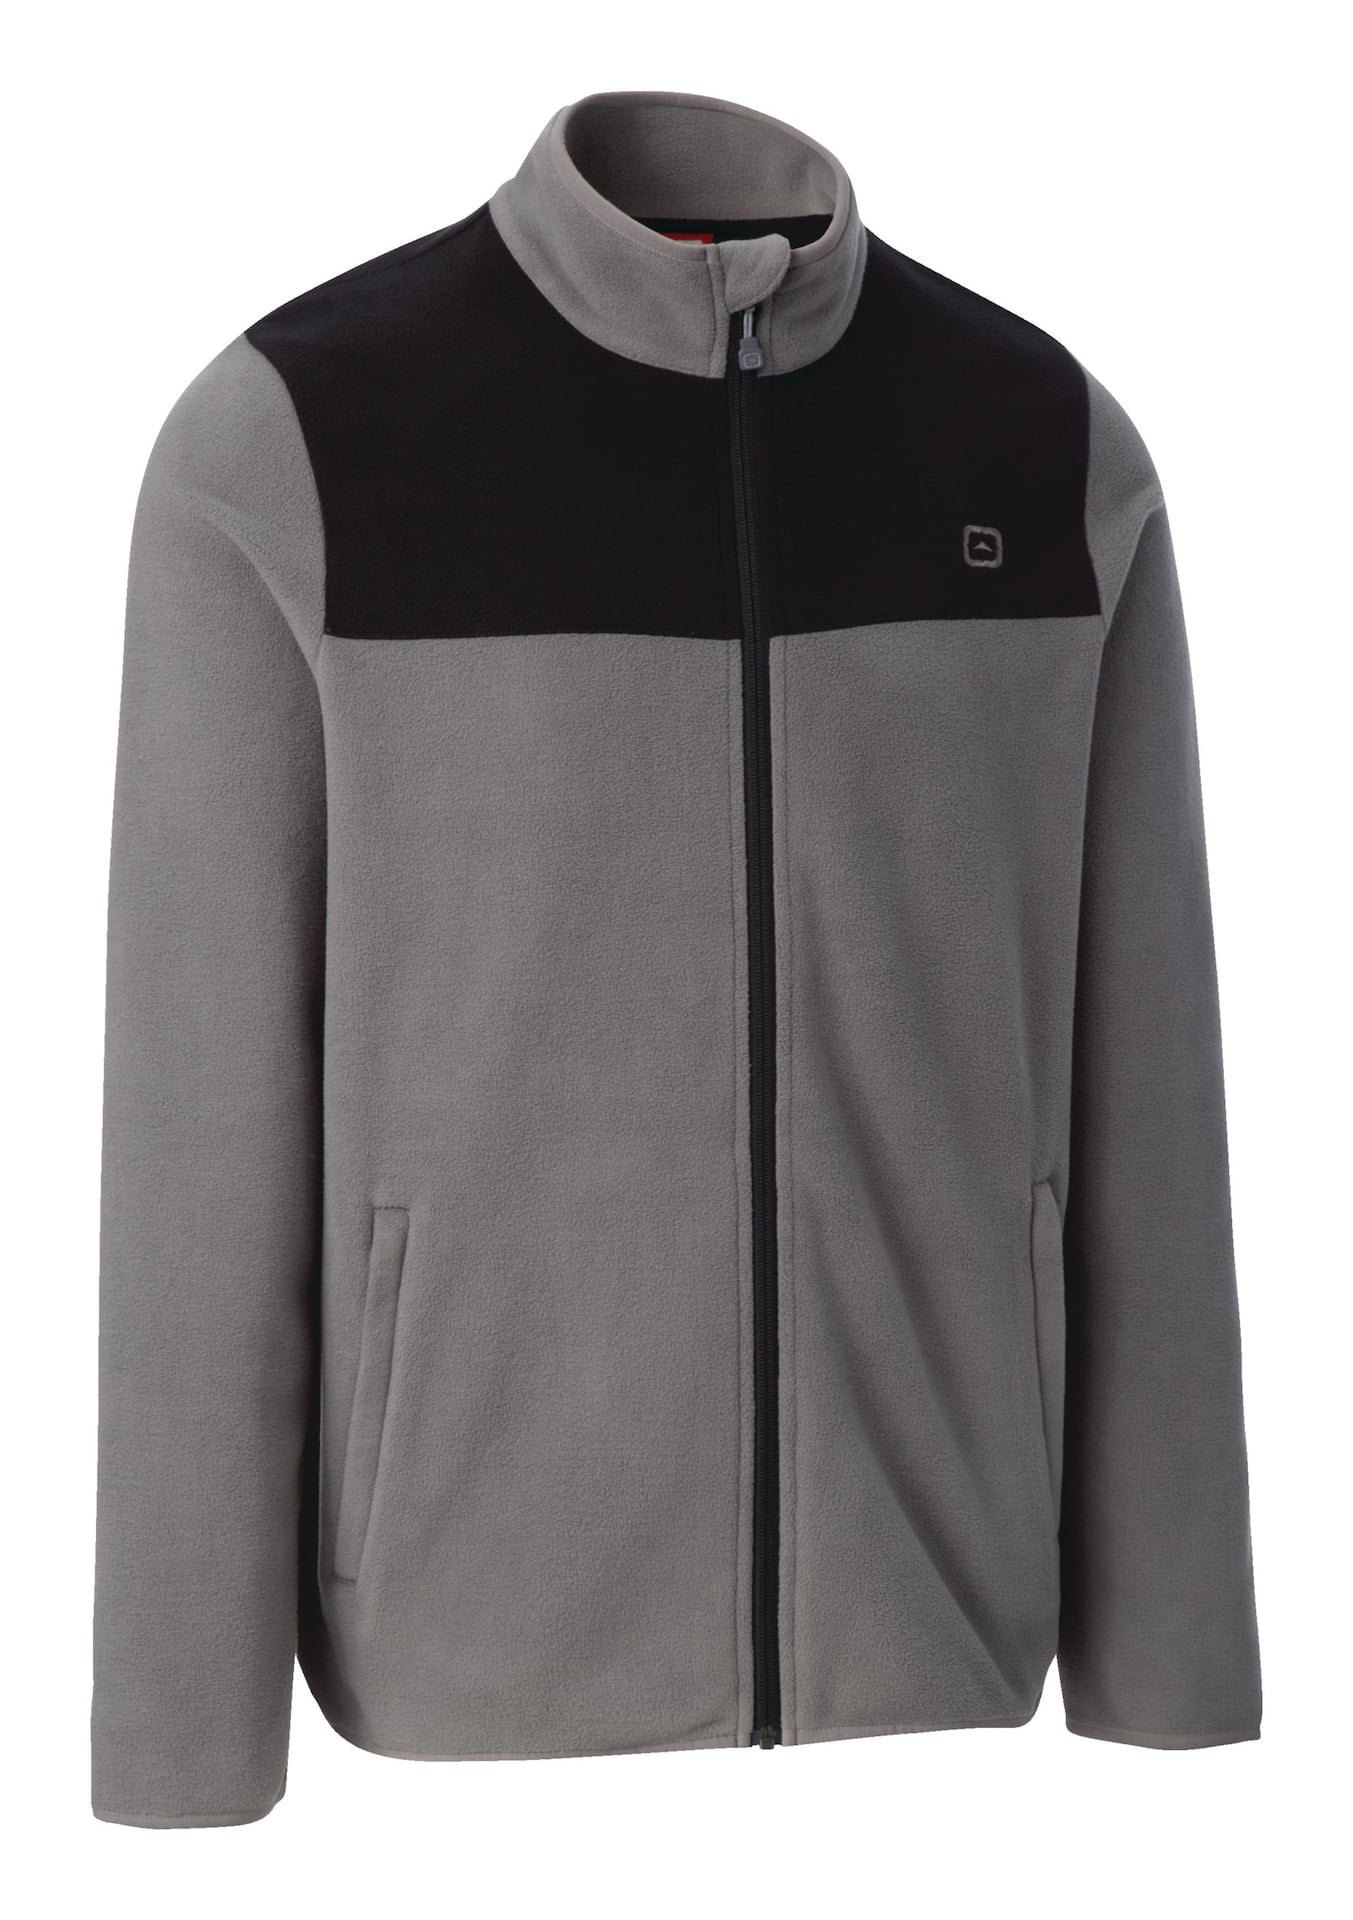 Under Armour Training Recover knit track jacket in black